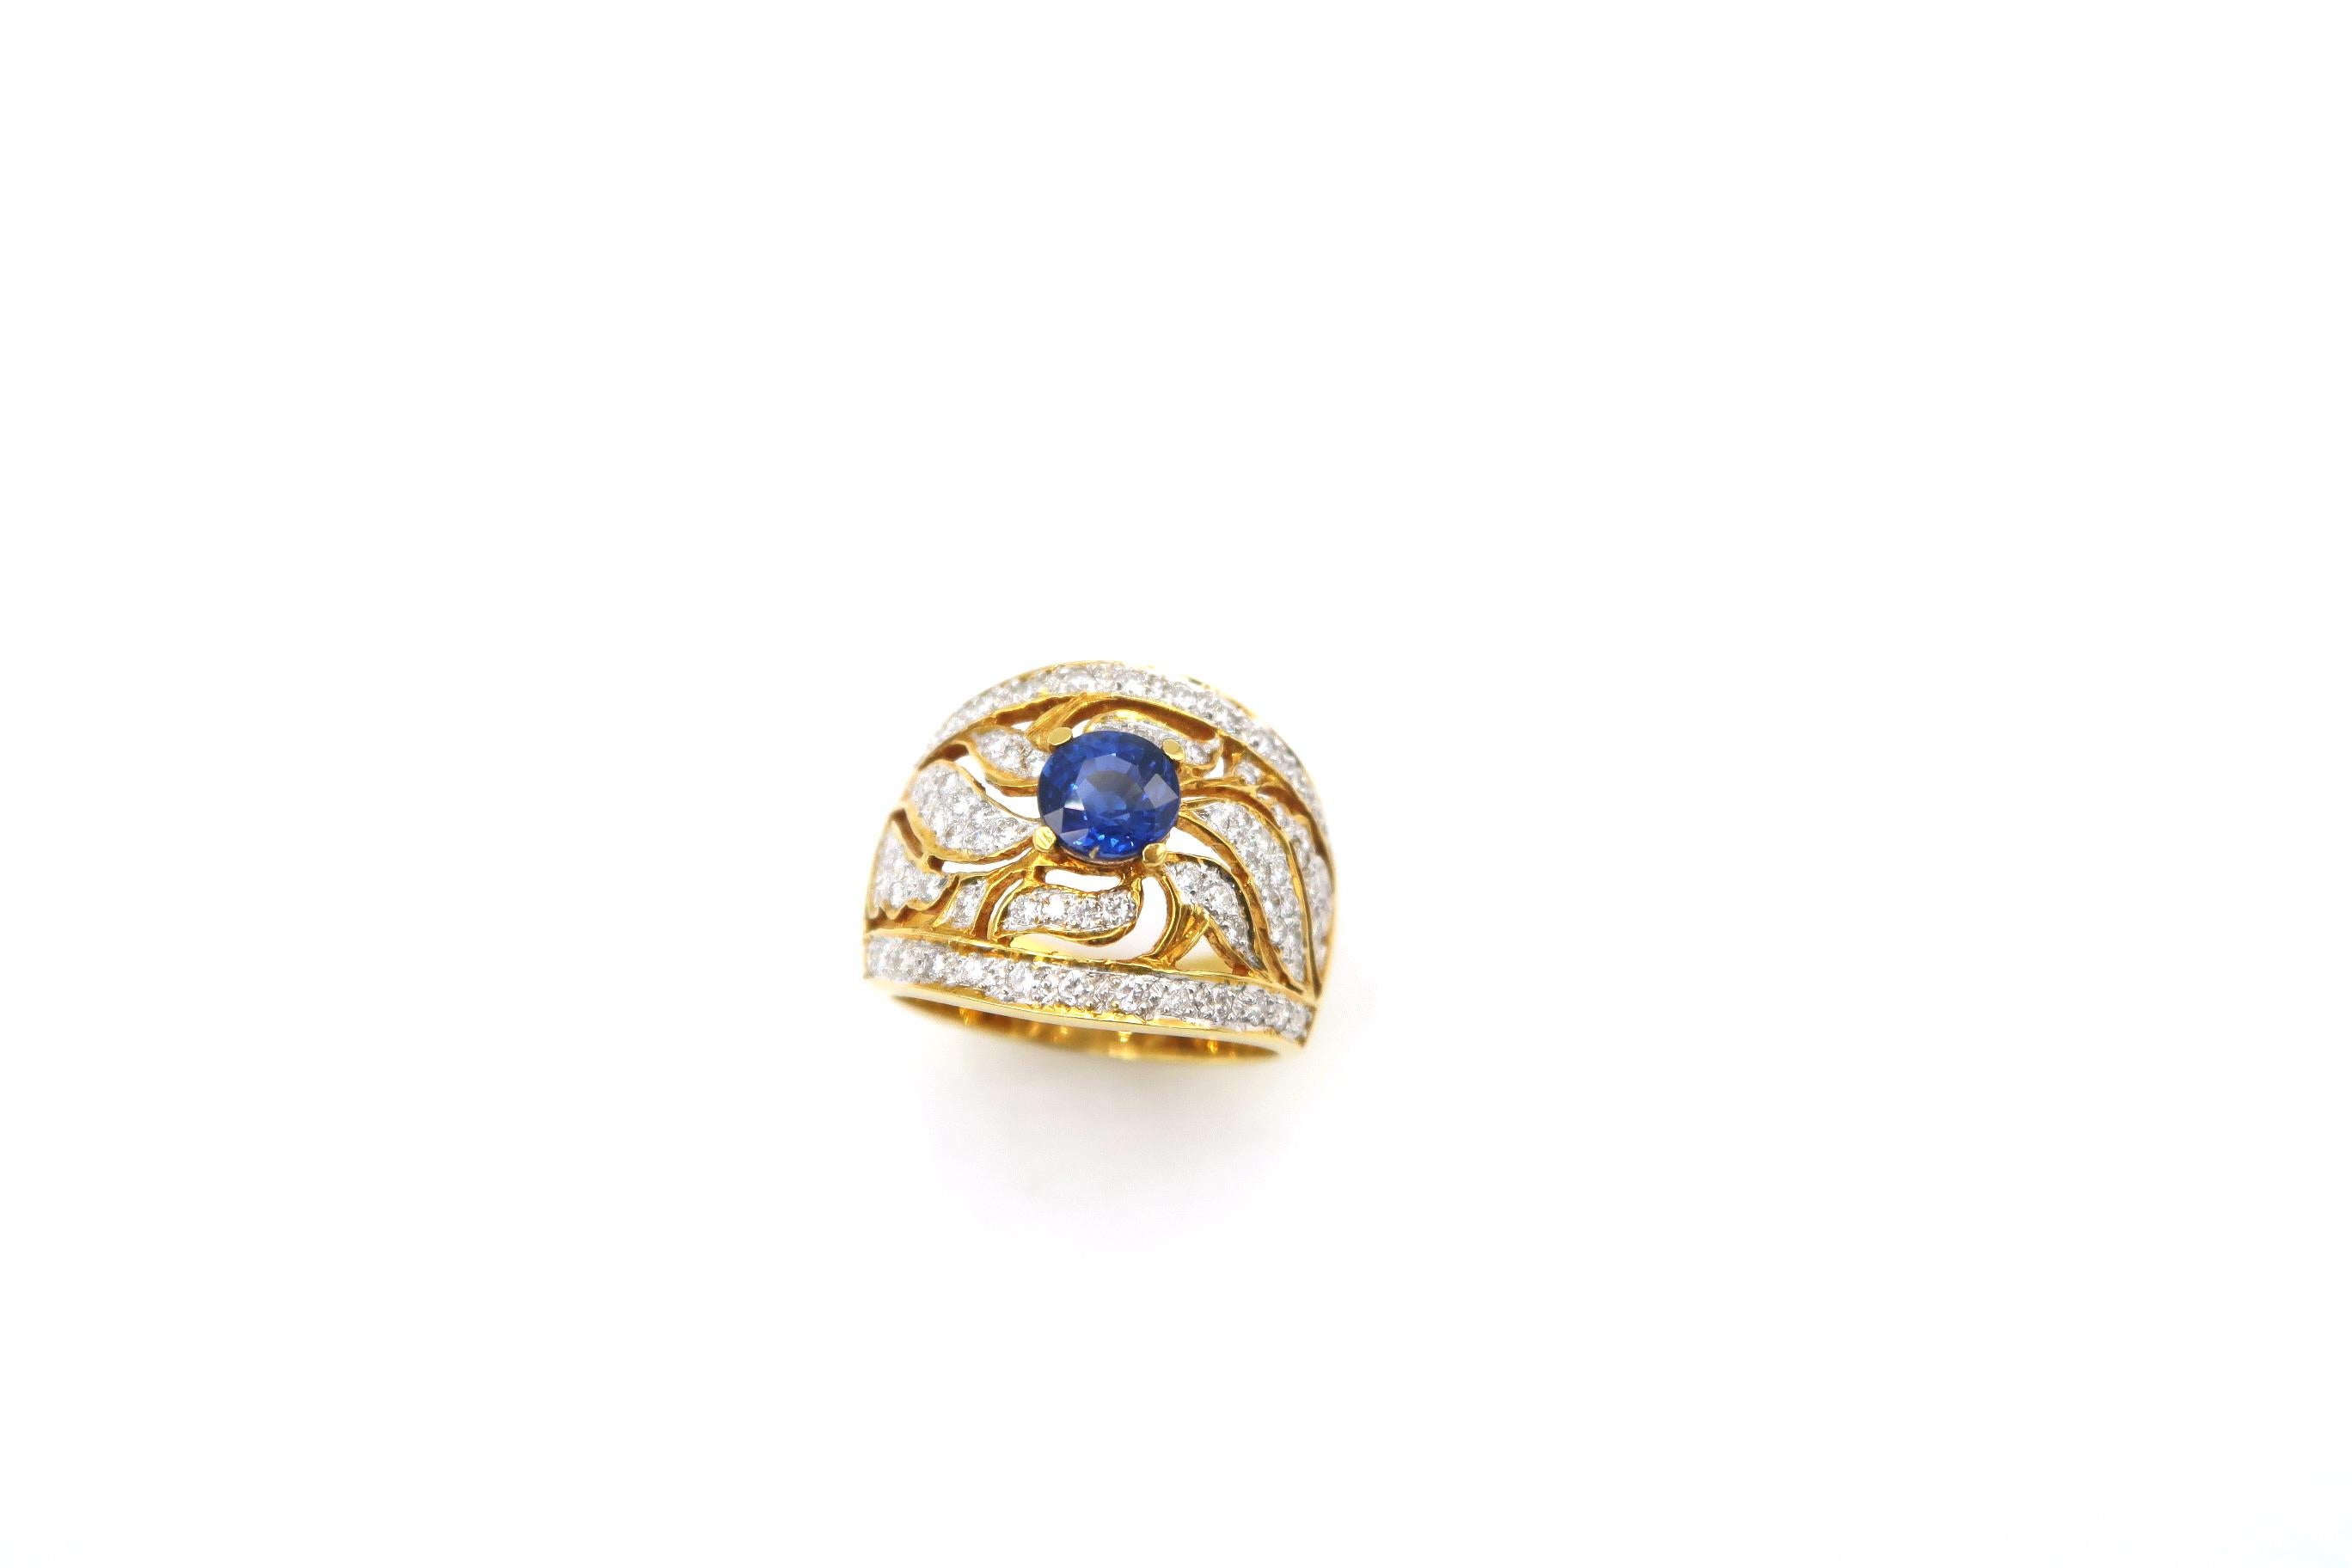 1.27 Carat Sapphire and Diamond Lacework Ring in 18K Gold 

Ring size: 55

Diamond: 0.74ct.
Sapphire: 1.27ct.
Gold: 18K 11.50g.